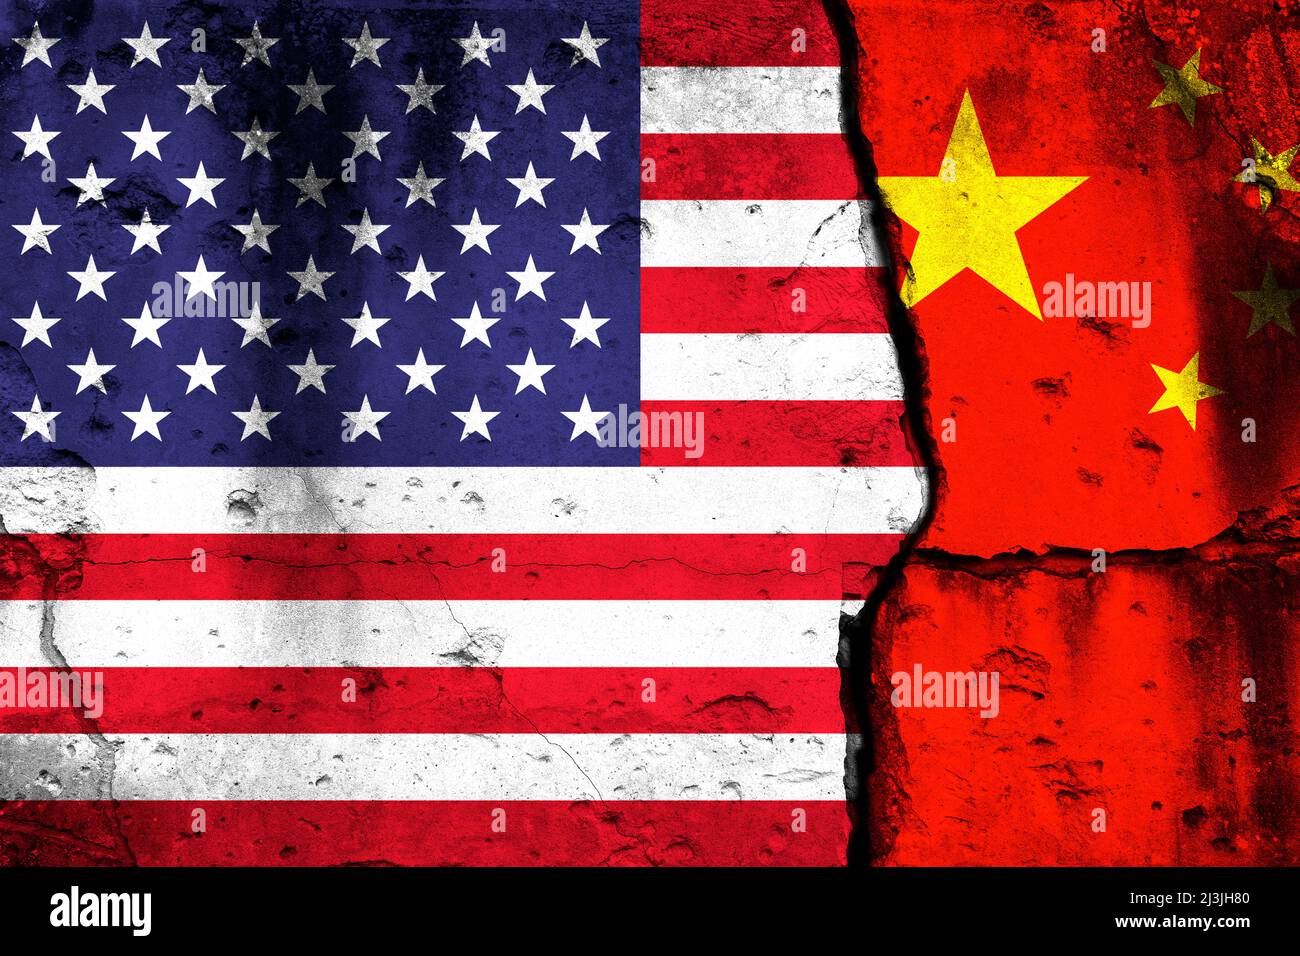 United States and China crisis. Background with national flags on cracked wall Stock Photo